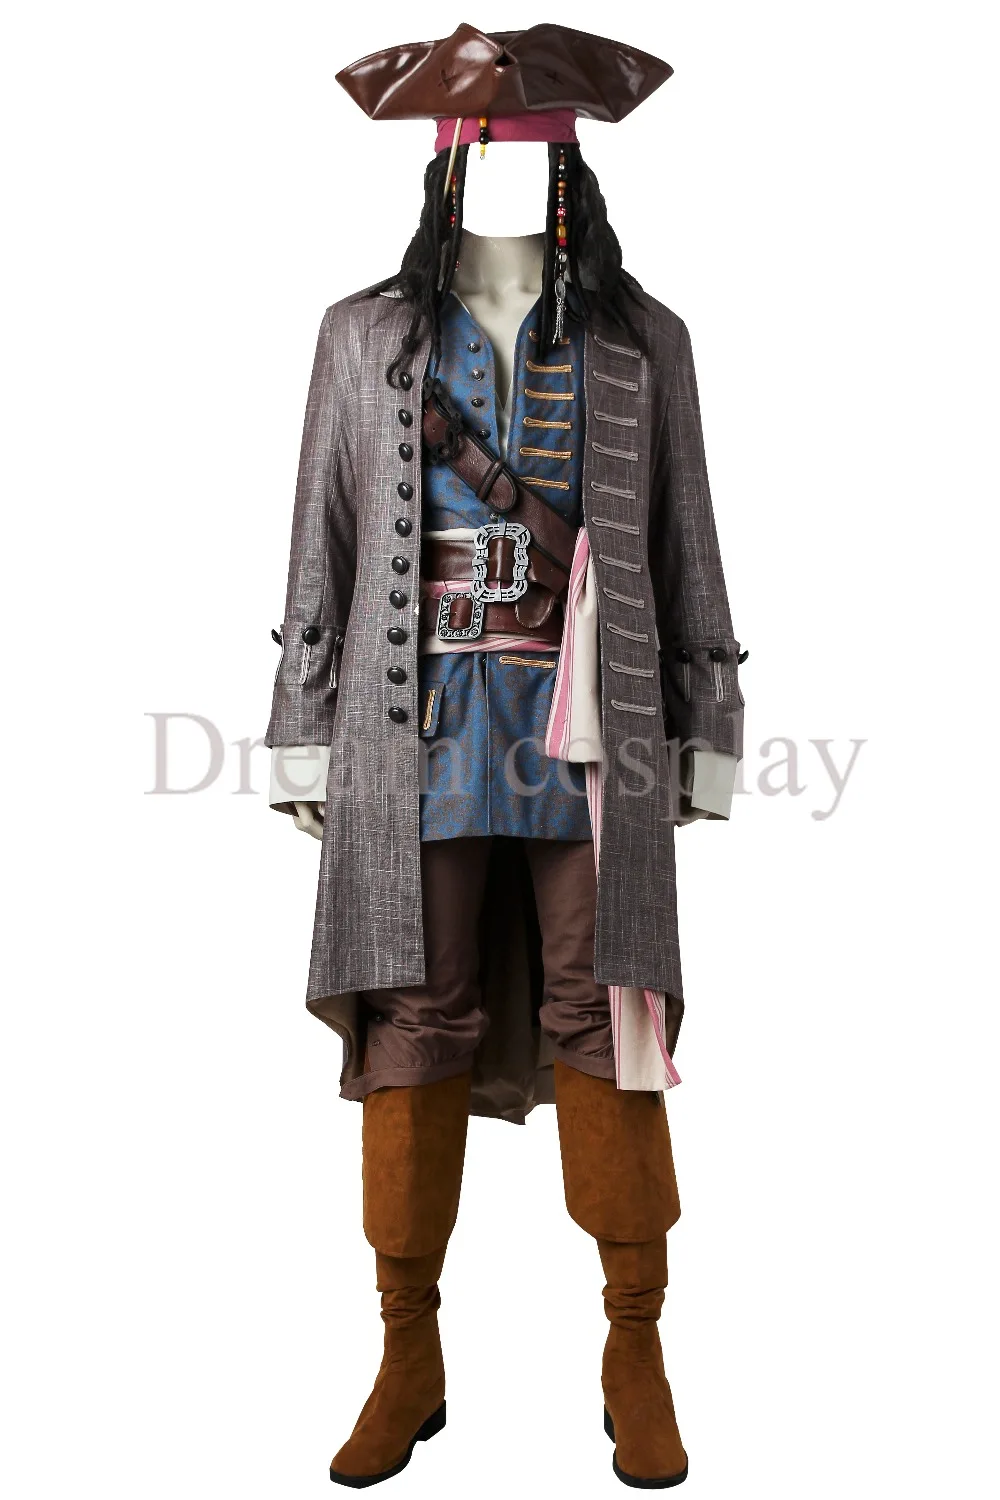 Hot Pirates of the Caribbean 5 V Jack Sparrow Cosplay Herren Stiefel Schuhe